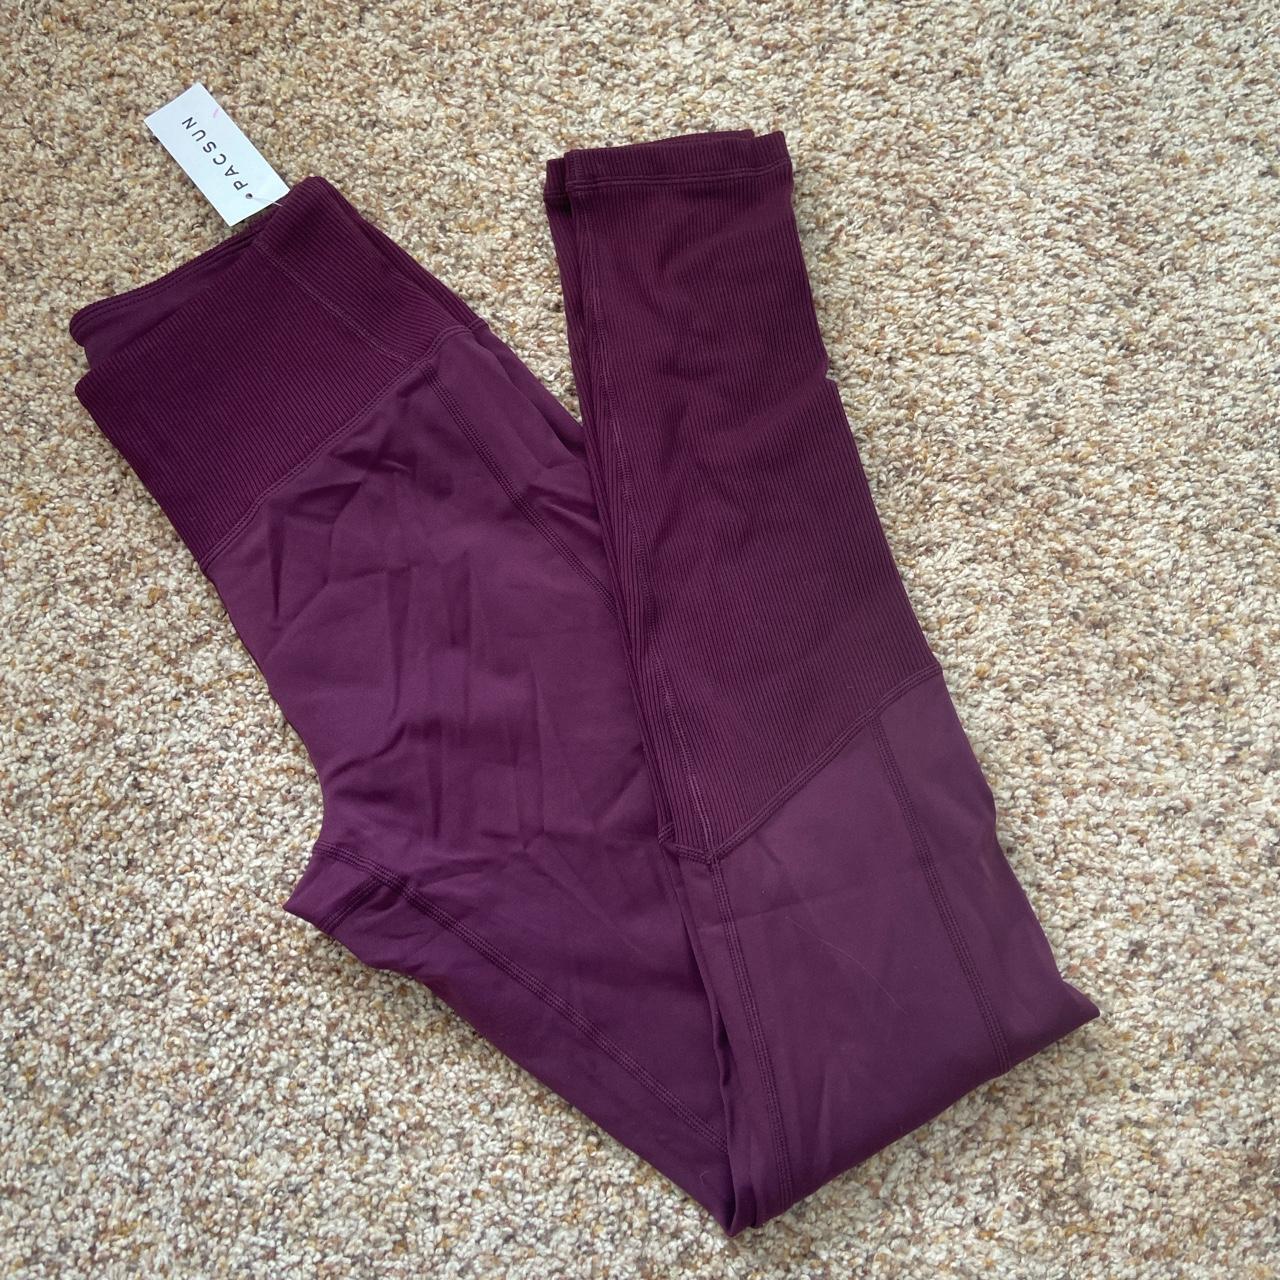 Pacsun ribbed leggings Super soft and - Depop